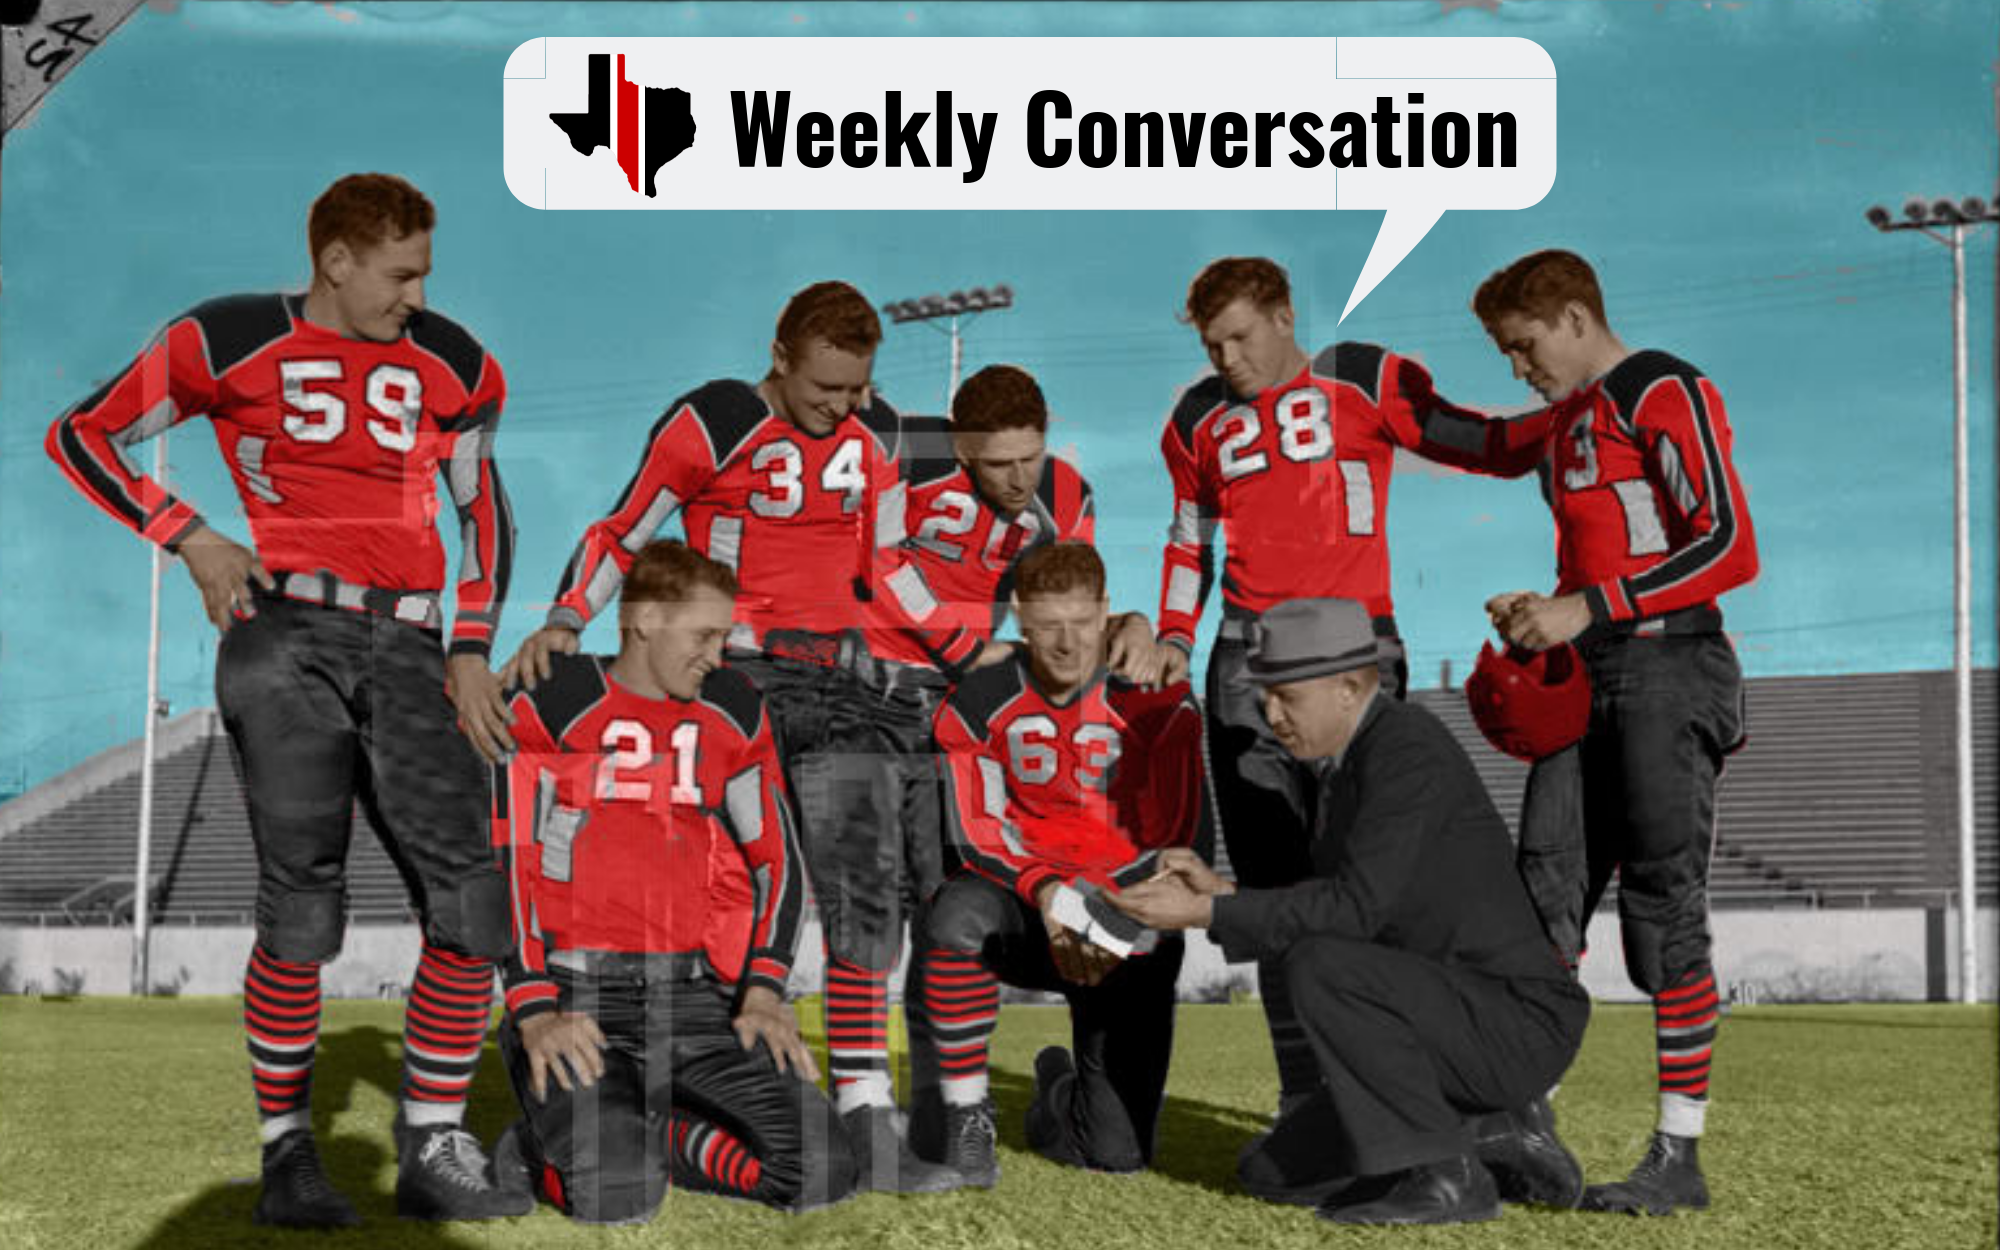 Weekly Conversation: I’m Placing My Bets!